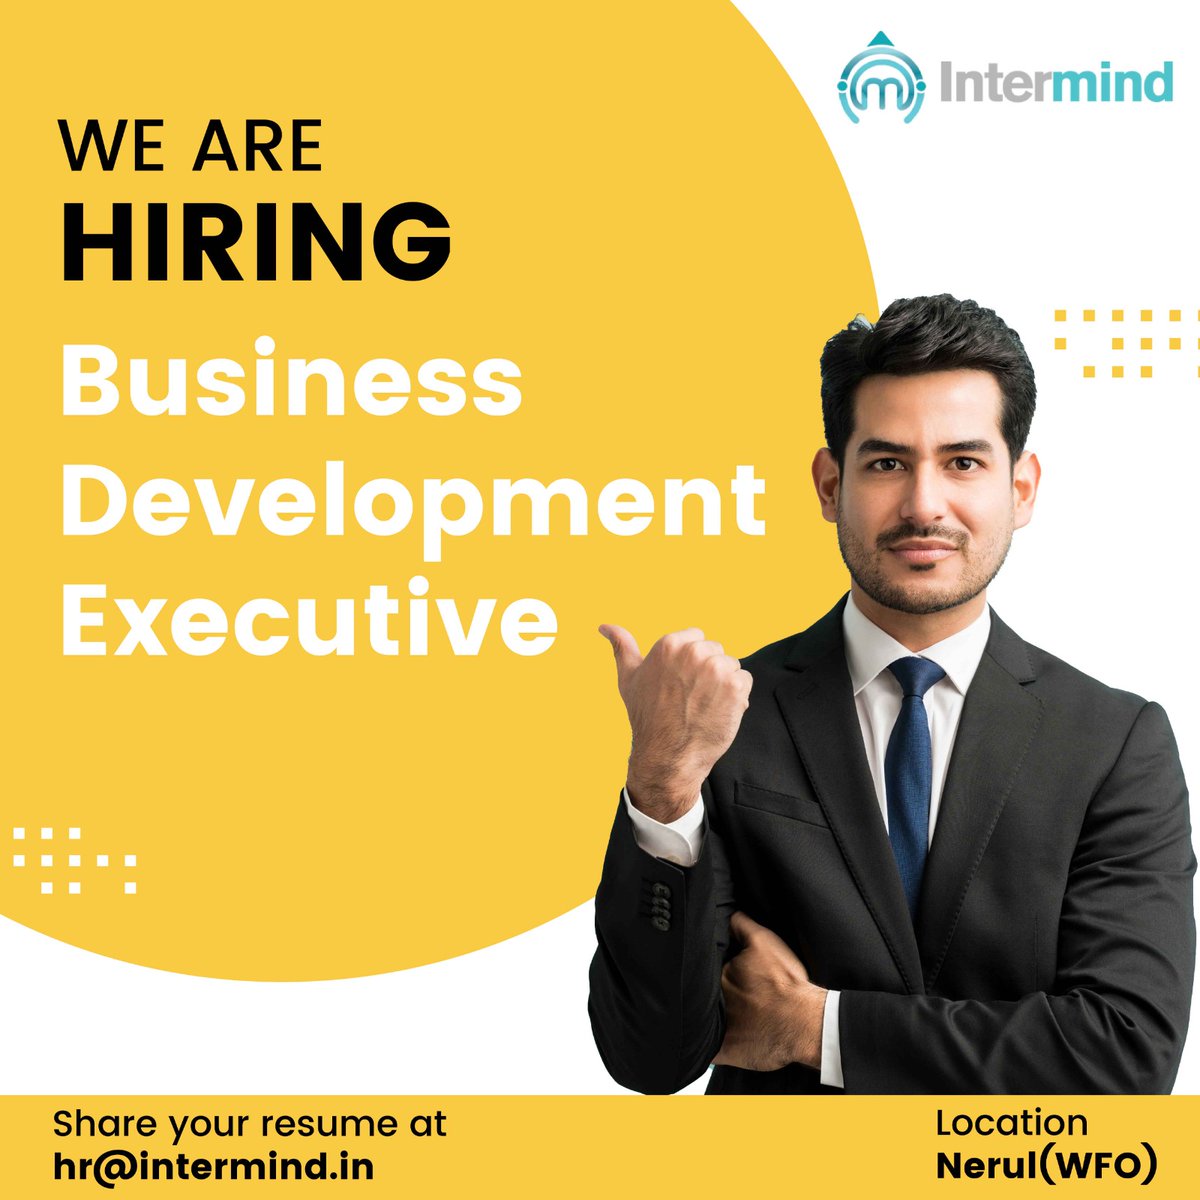 #BusinessDevelopmentExecutive wanted! Develop new business opportunities, maintain client relationships, & achieve sales targets. Requires excellent communication skills & a results-driven mindset.

Interested applicants drop in your resumes at hr@intermind.in

#jobs #Intermind